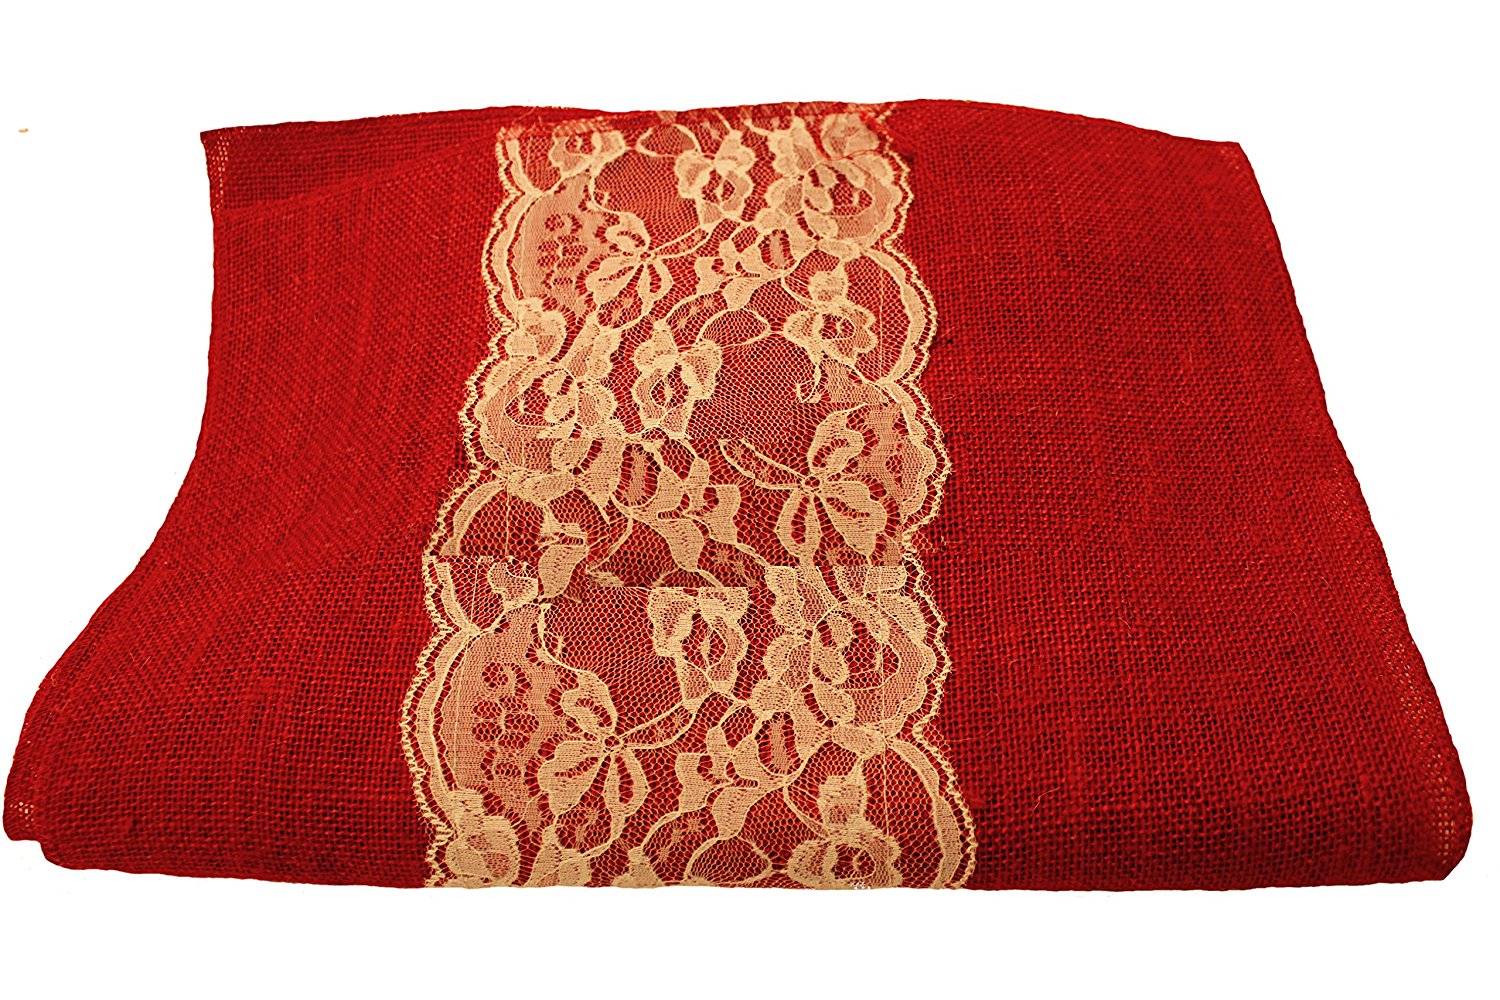 14" Red Burlap Runner with 6" White Lace